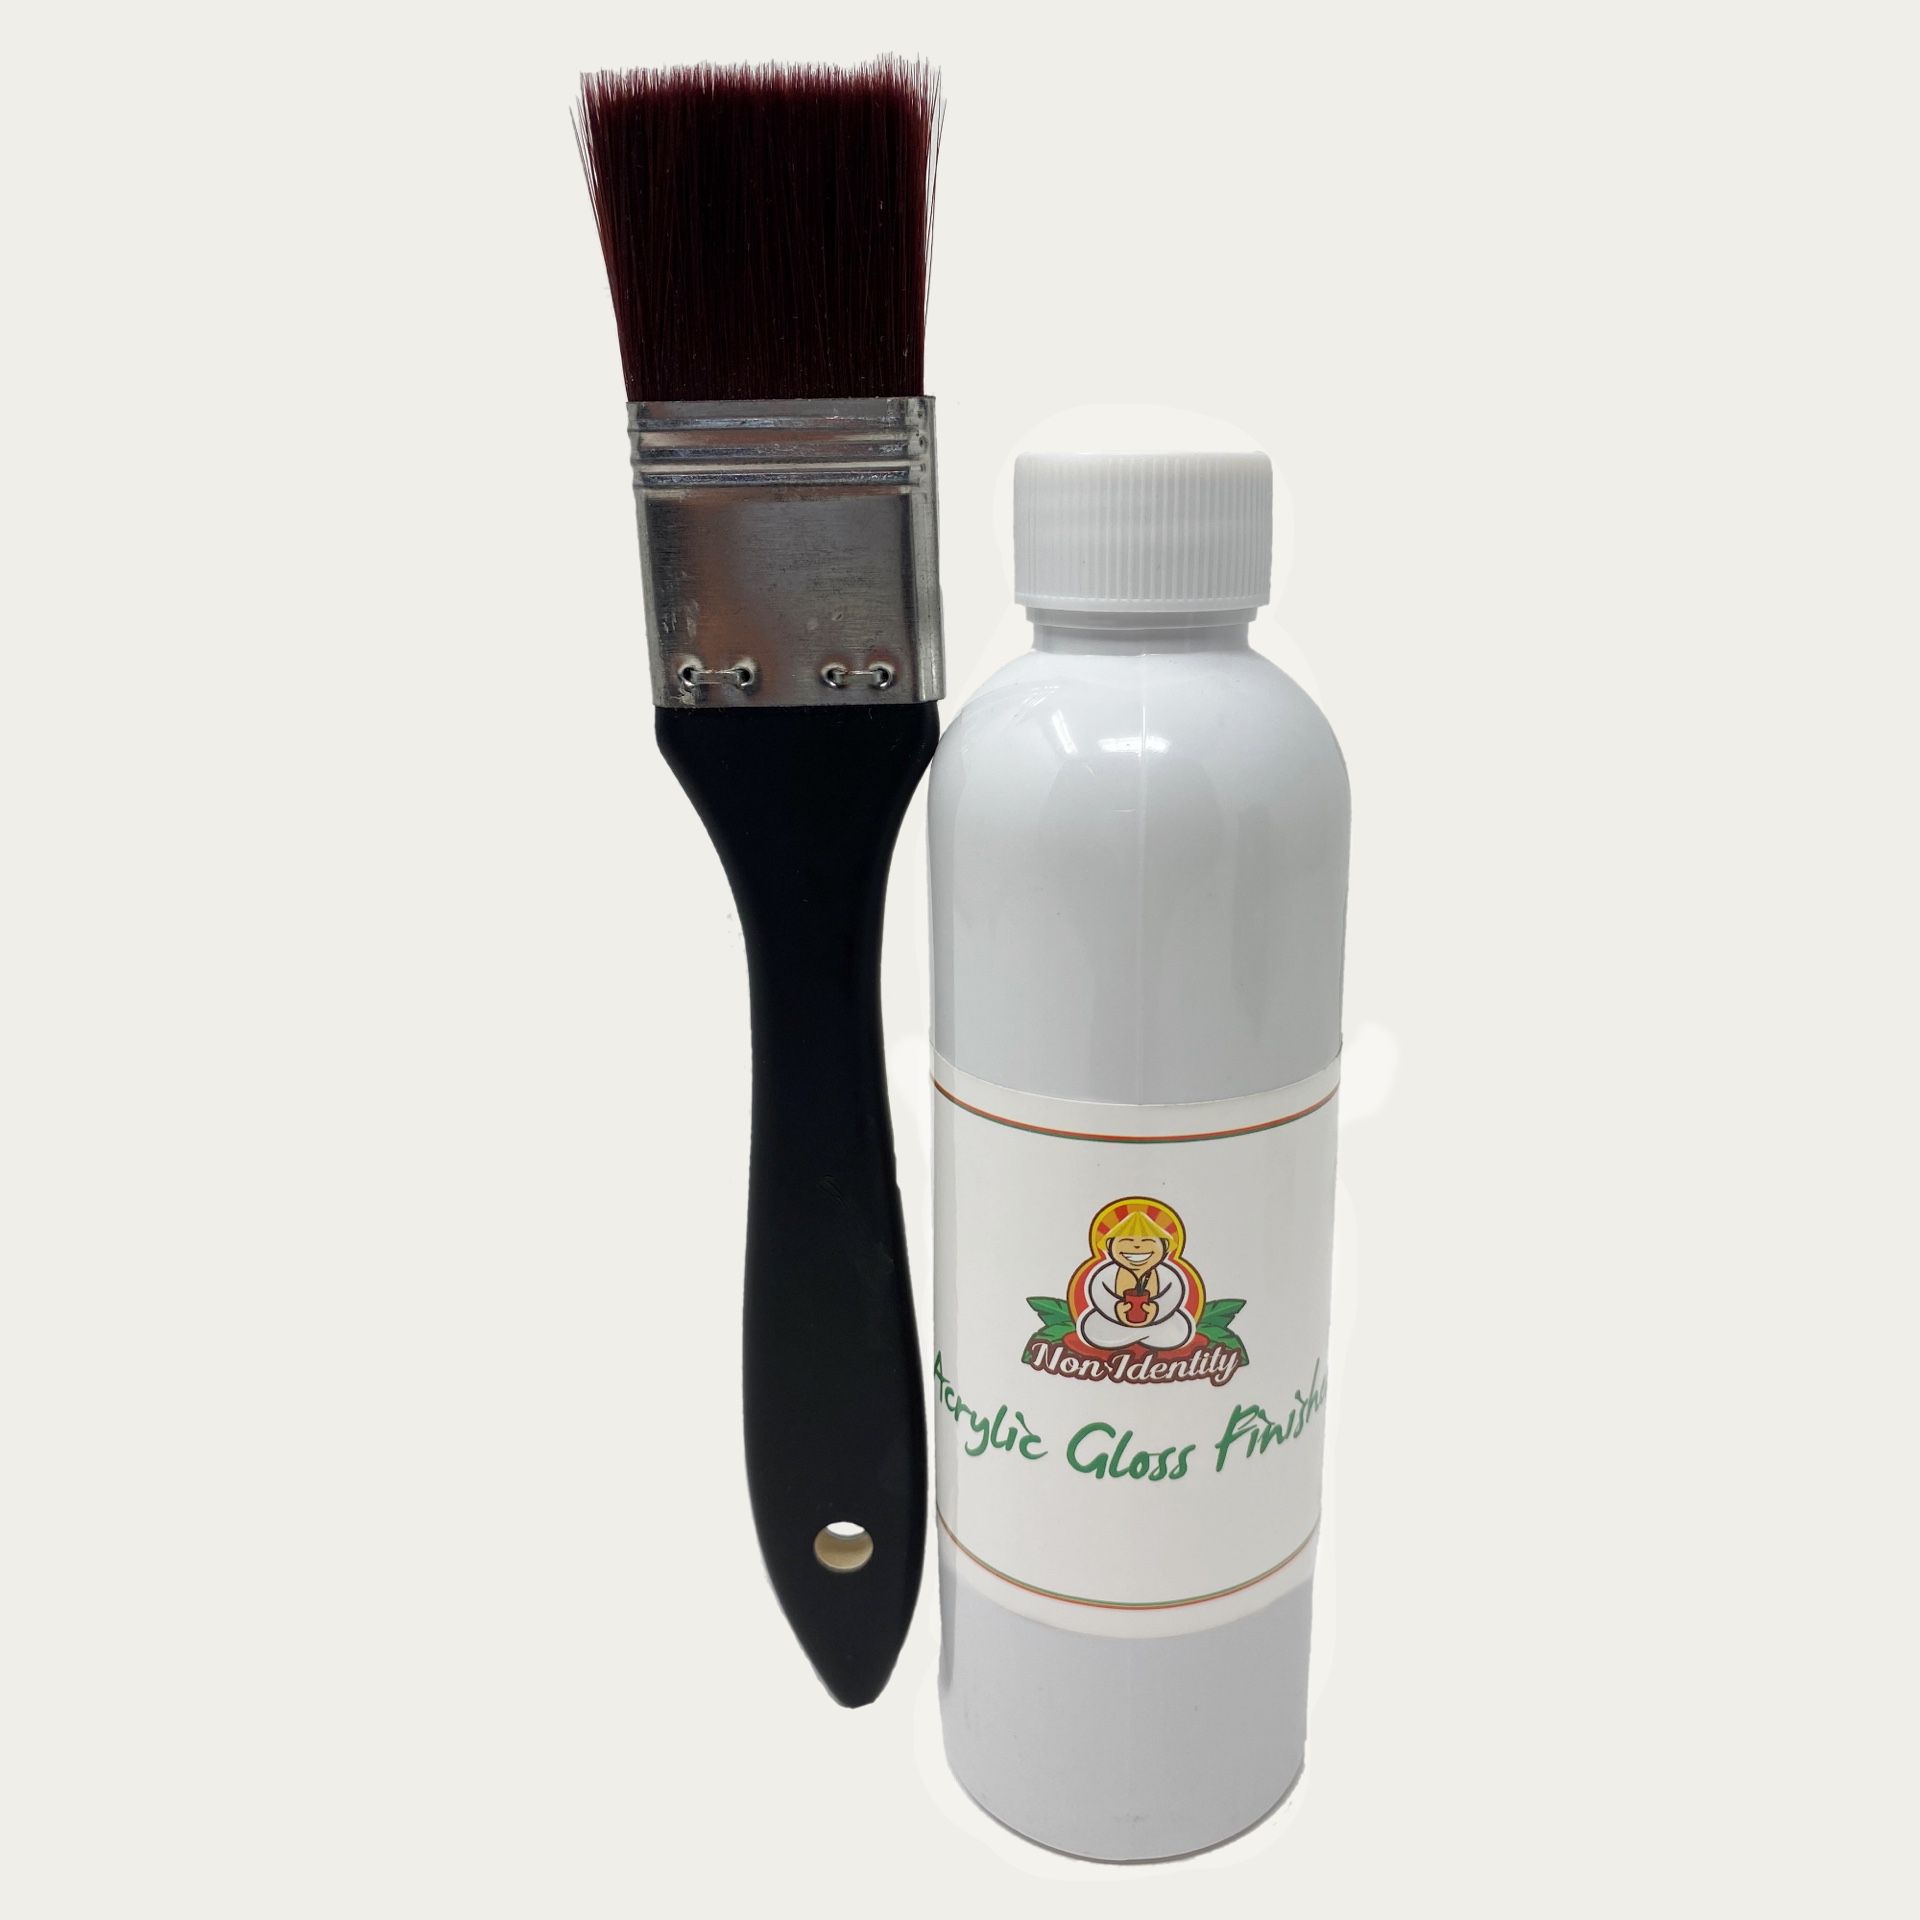 Acrylic Paint medium/sealant/finisher and Paint brush - Free delivery for Columbus Area!